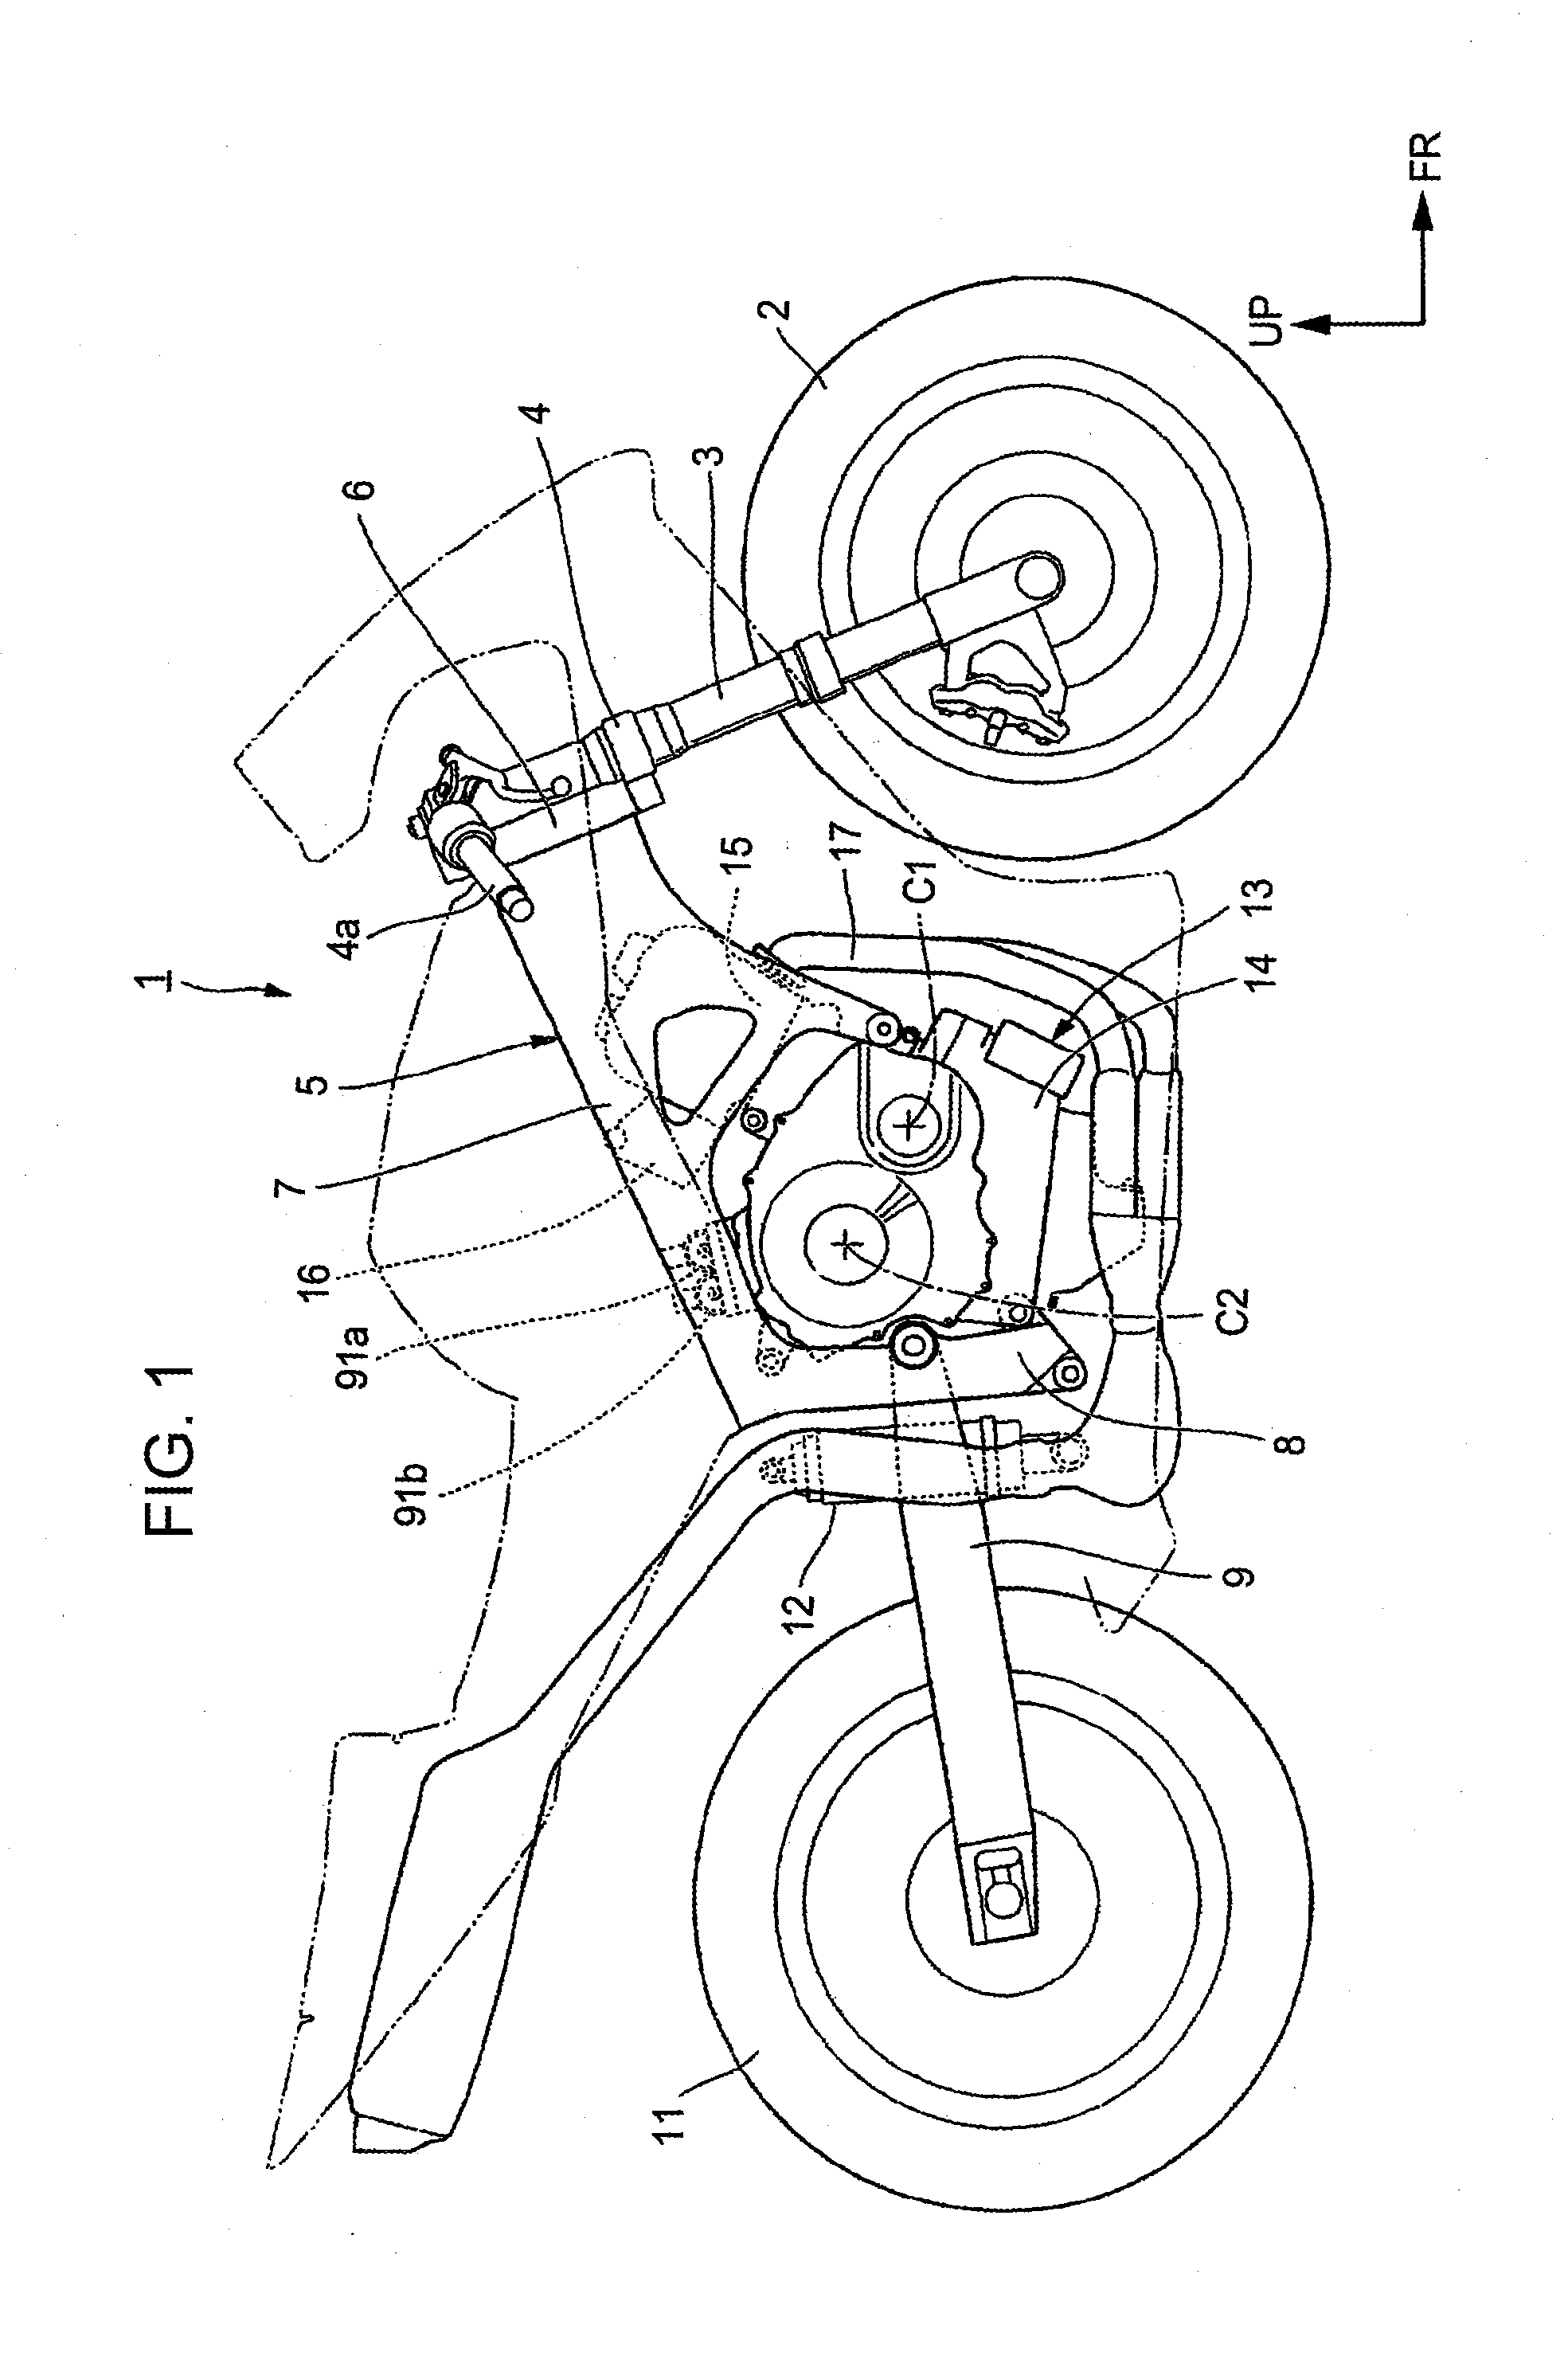 Speed change controlling apparatus for motorcycle